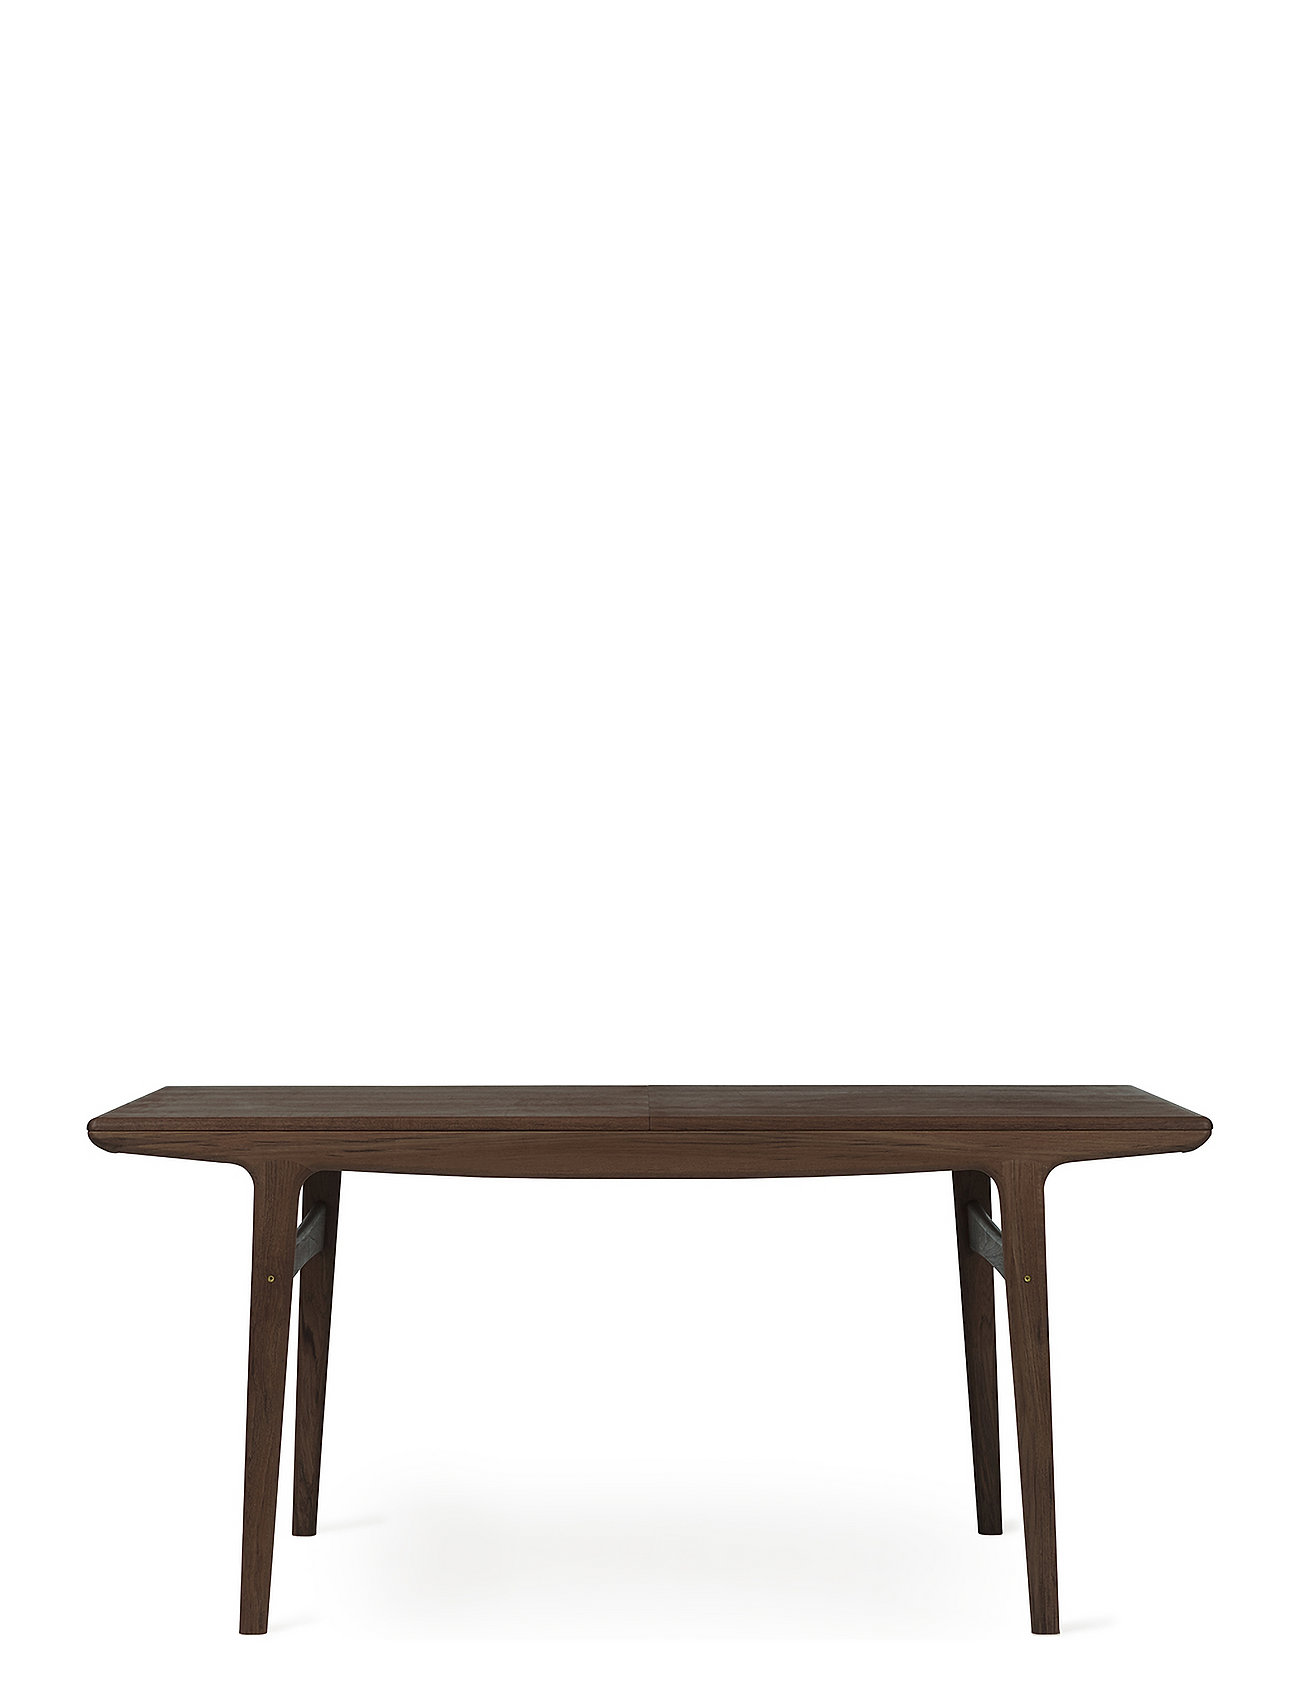 Evermore Dining Table 160 Cm Home Furniture Tables Dining Tables Brown Warm Nordic Furniture